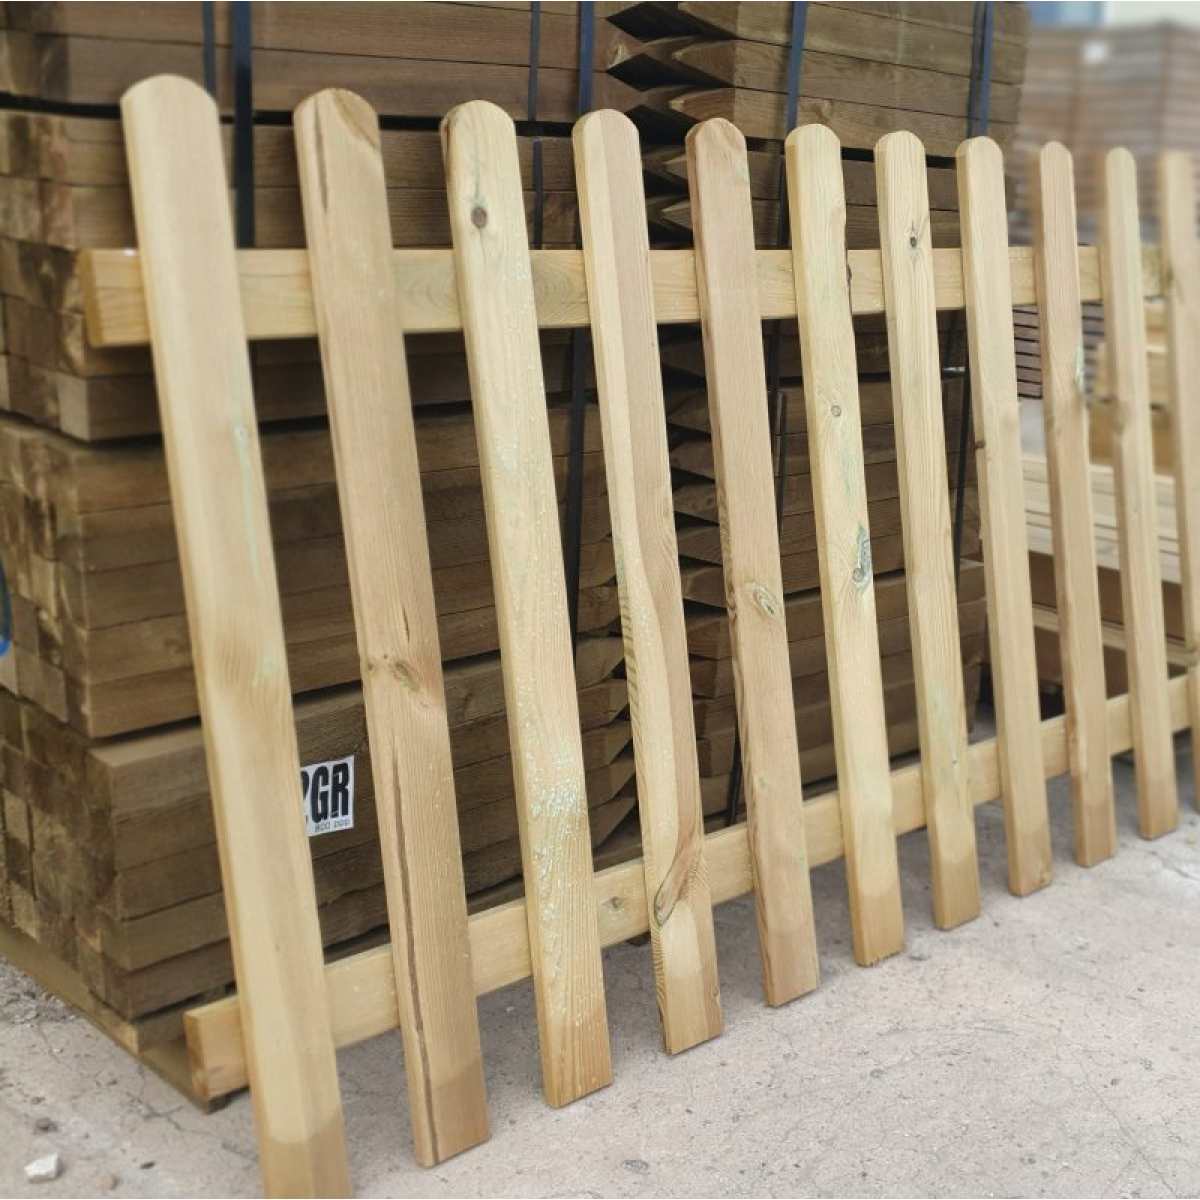 RoundTopPailingFence e1609852288201 Image by Websters Timber